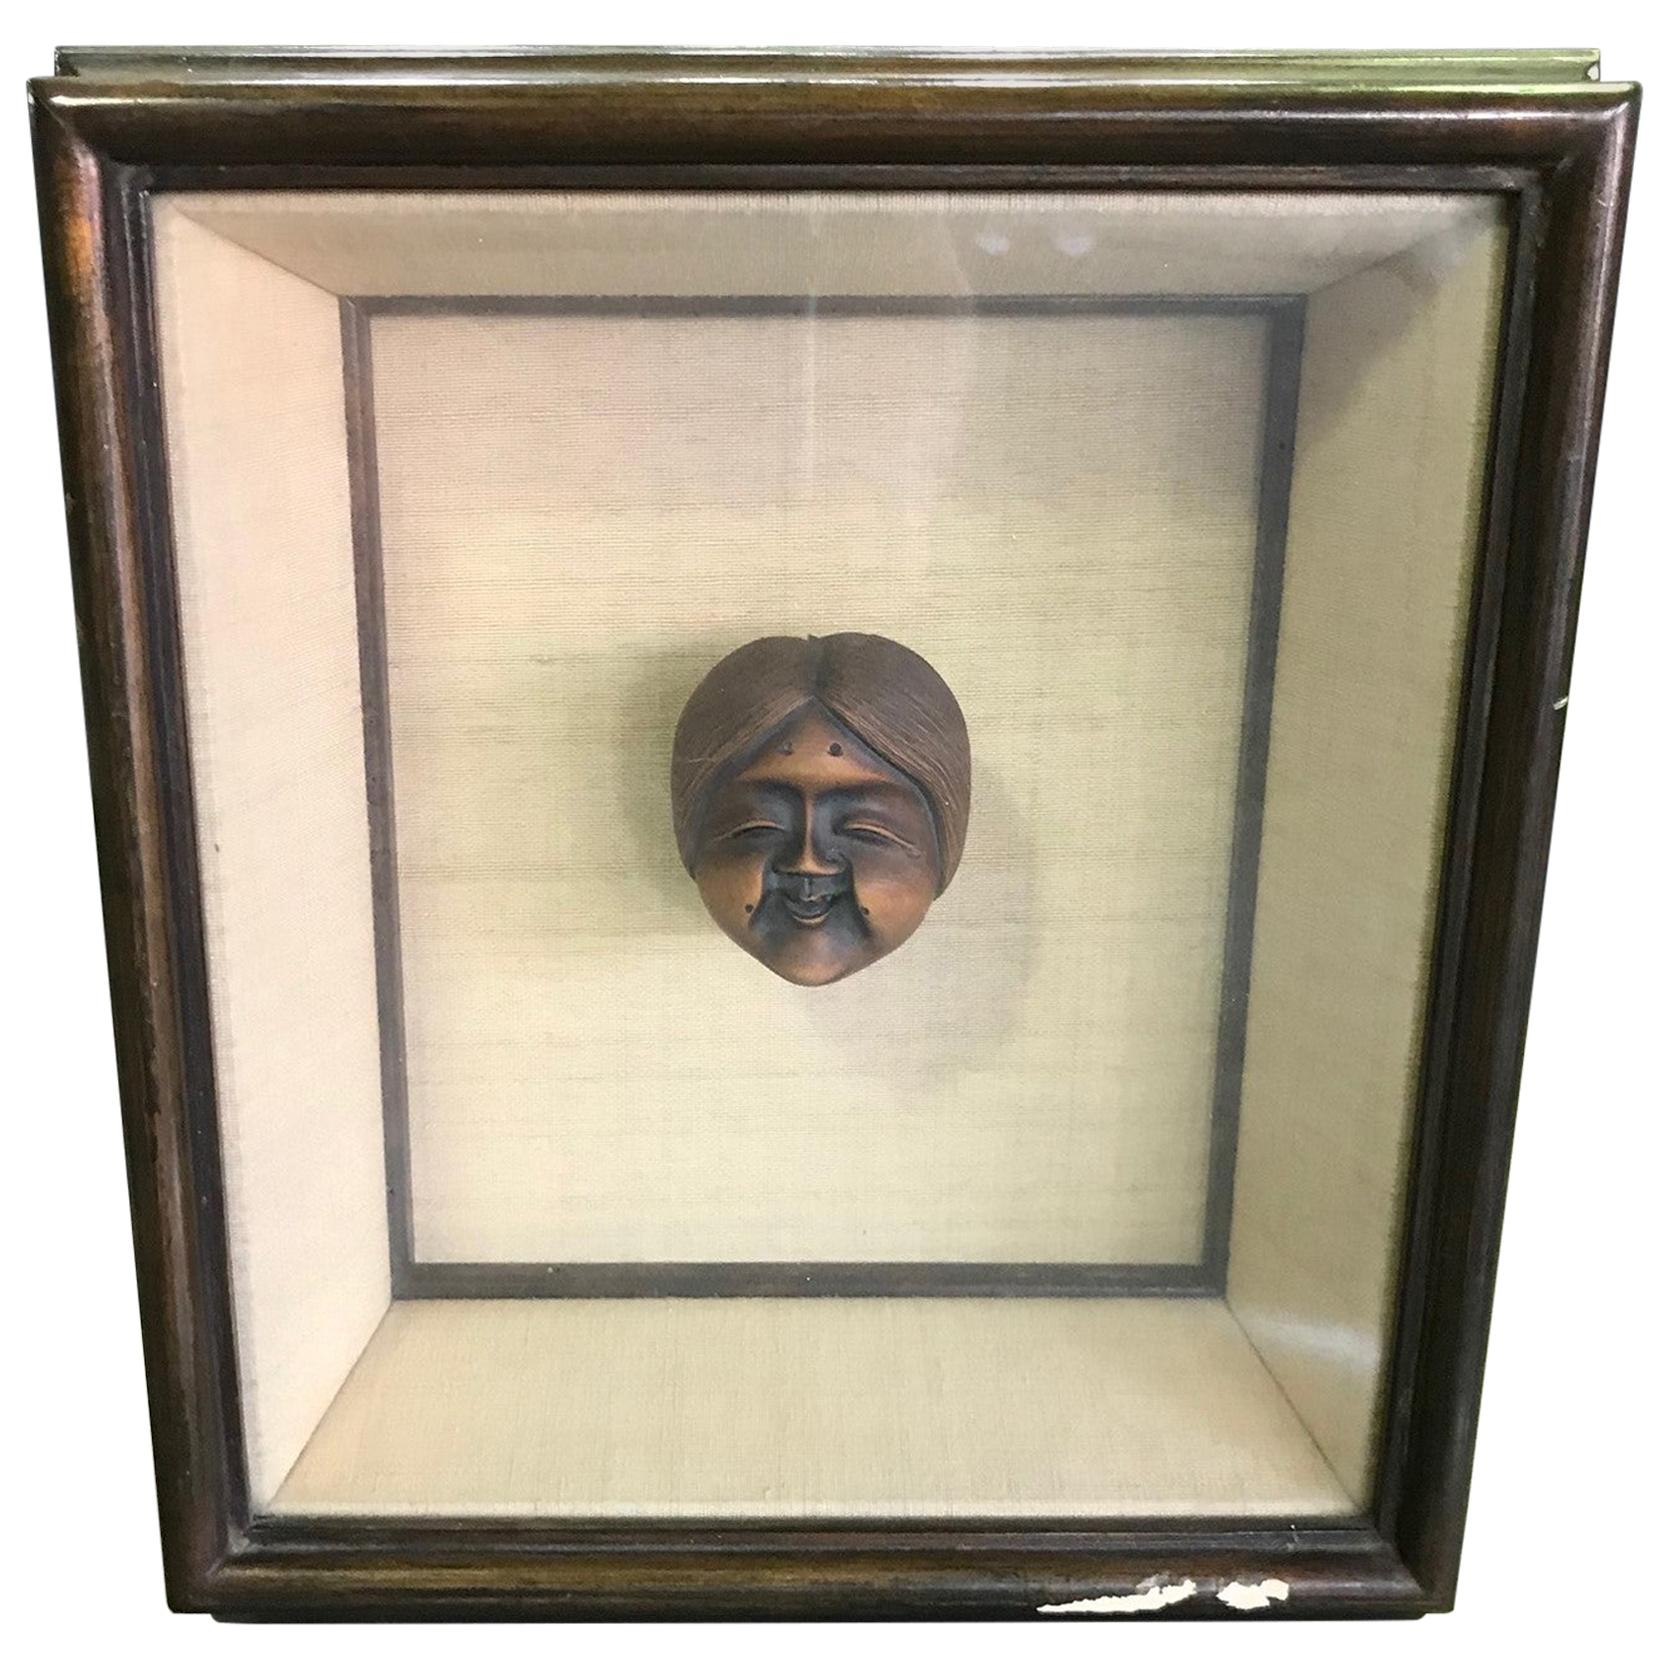 A wonderfully detailed and displayed miniature well-carved wood Japanese netsuke of a old smiling woman. These decorative pieces often hung from drawstrings of small Inro pouches, which Japanese men customarily wore suspended and sometimes hidden on